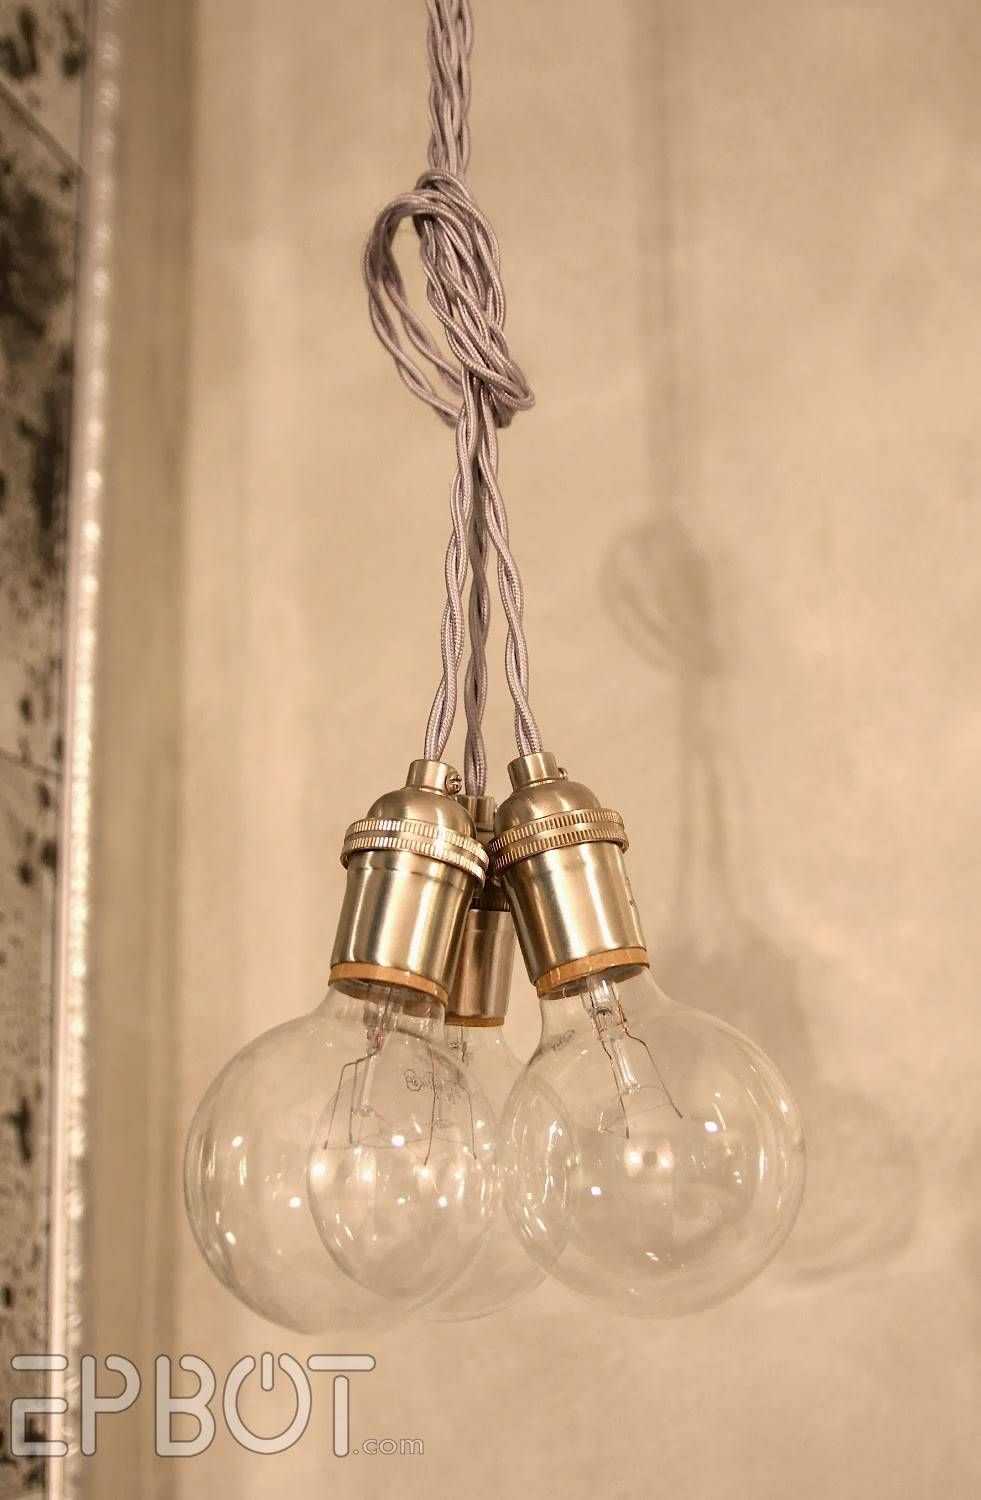 Epbot: Wire Your Own Pendant Lighting – Cheap, Easy, & Fun! Inside Homemade Pendant Lights (Photo 9 of 15)